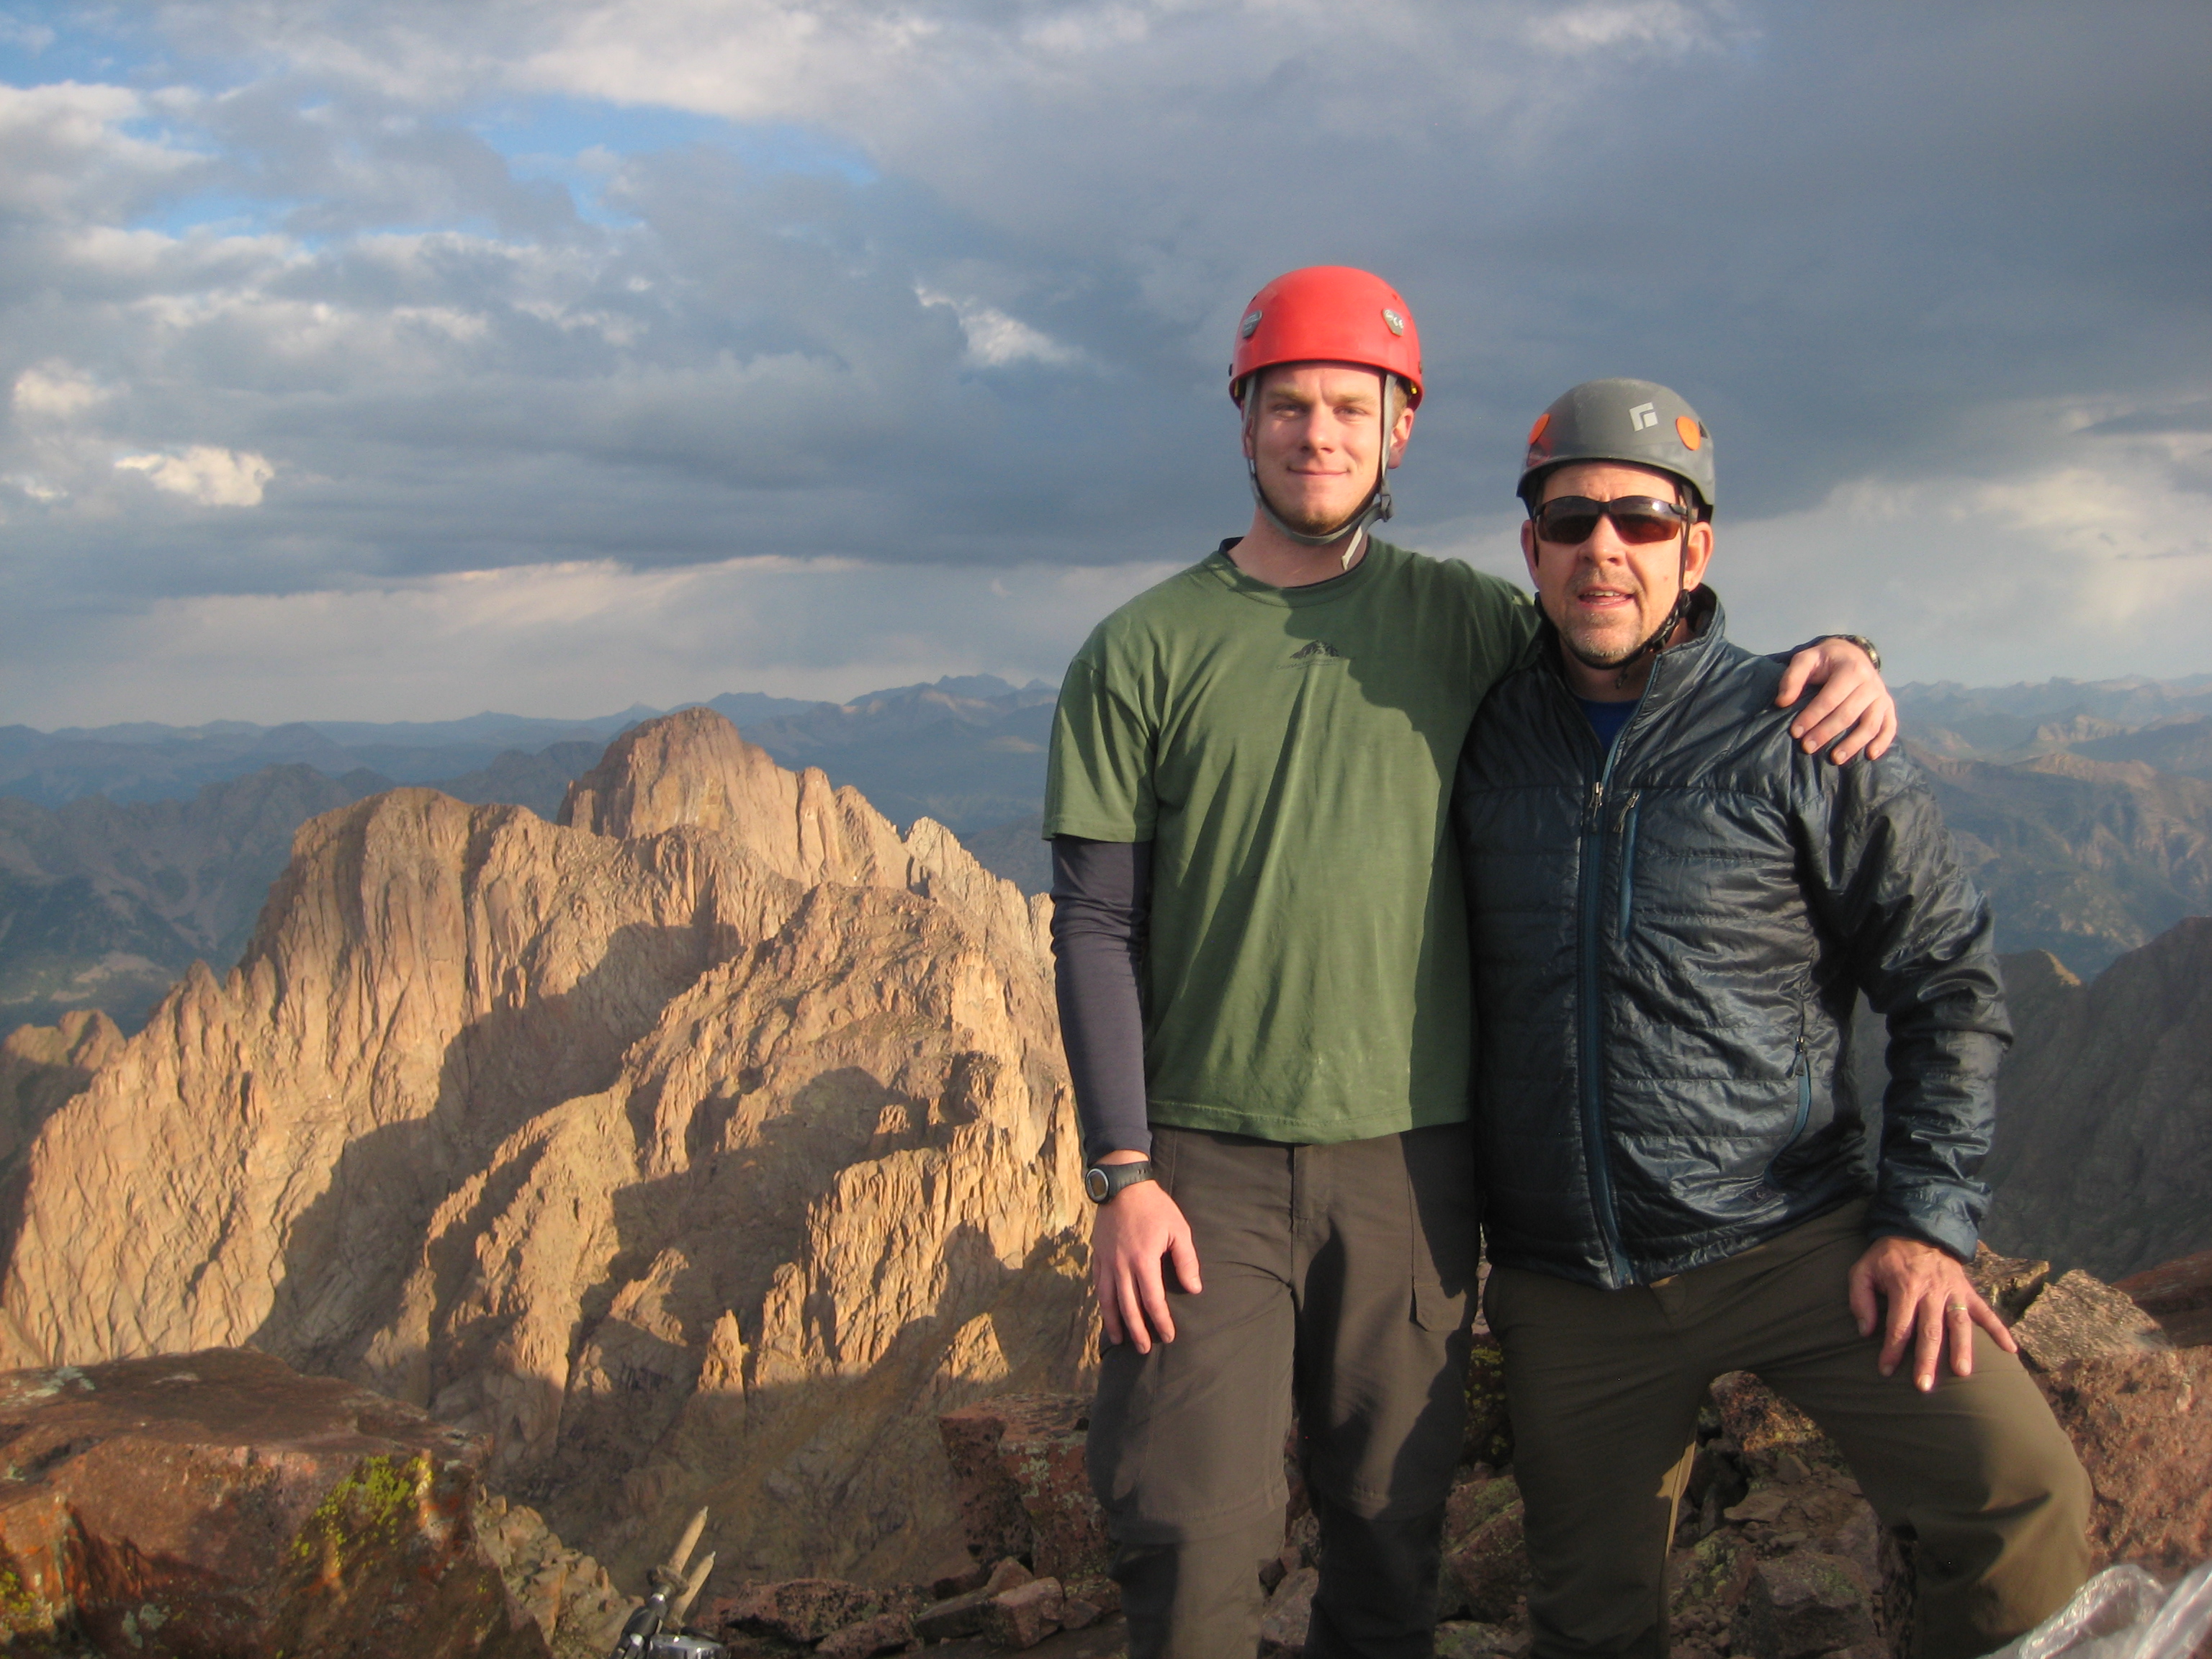 An older man and a younger man stand facing the camera, with their arms around each other, in the background looms a jagged peak under cloudy skies.